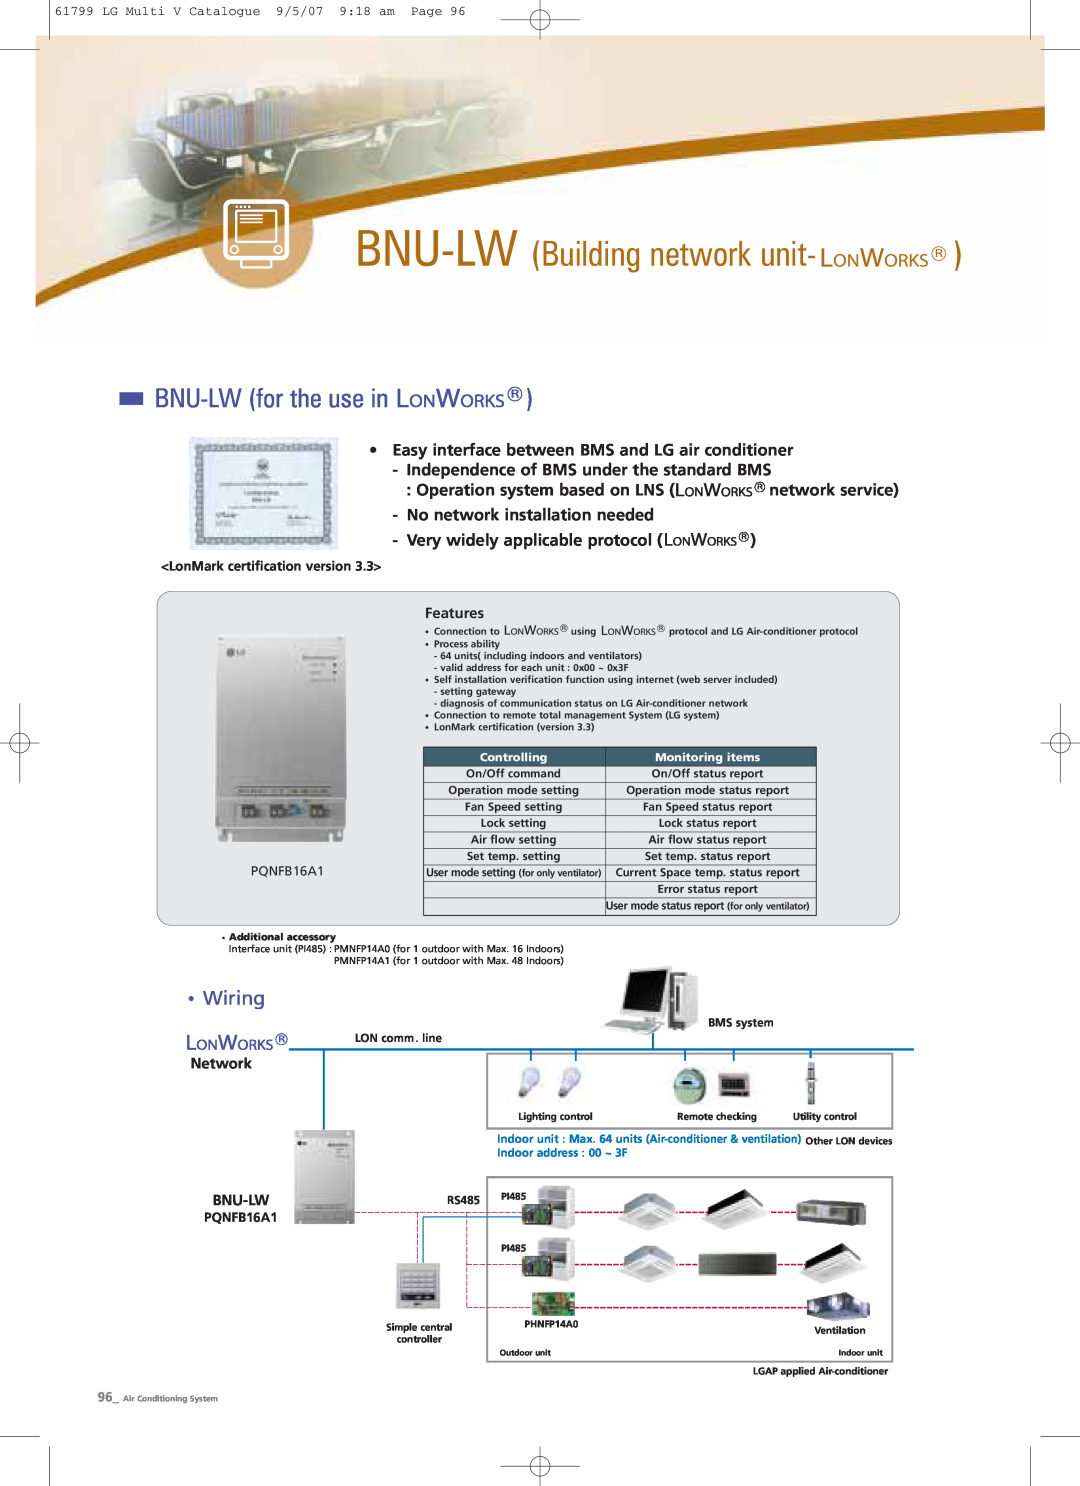 LG Electronics PRHR040 BNU-LW Building network unit, BNU-LW for the use in, Wiring, LonMark certification version, PI485 